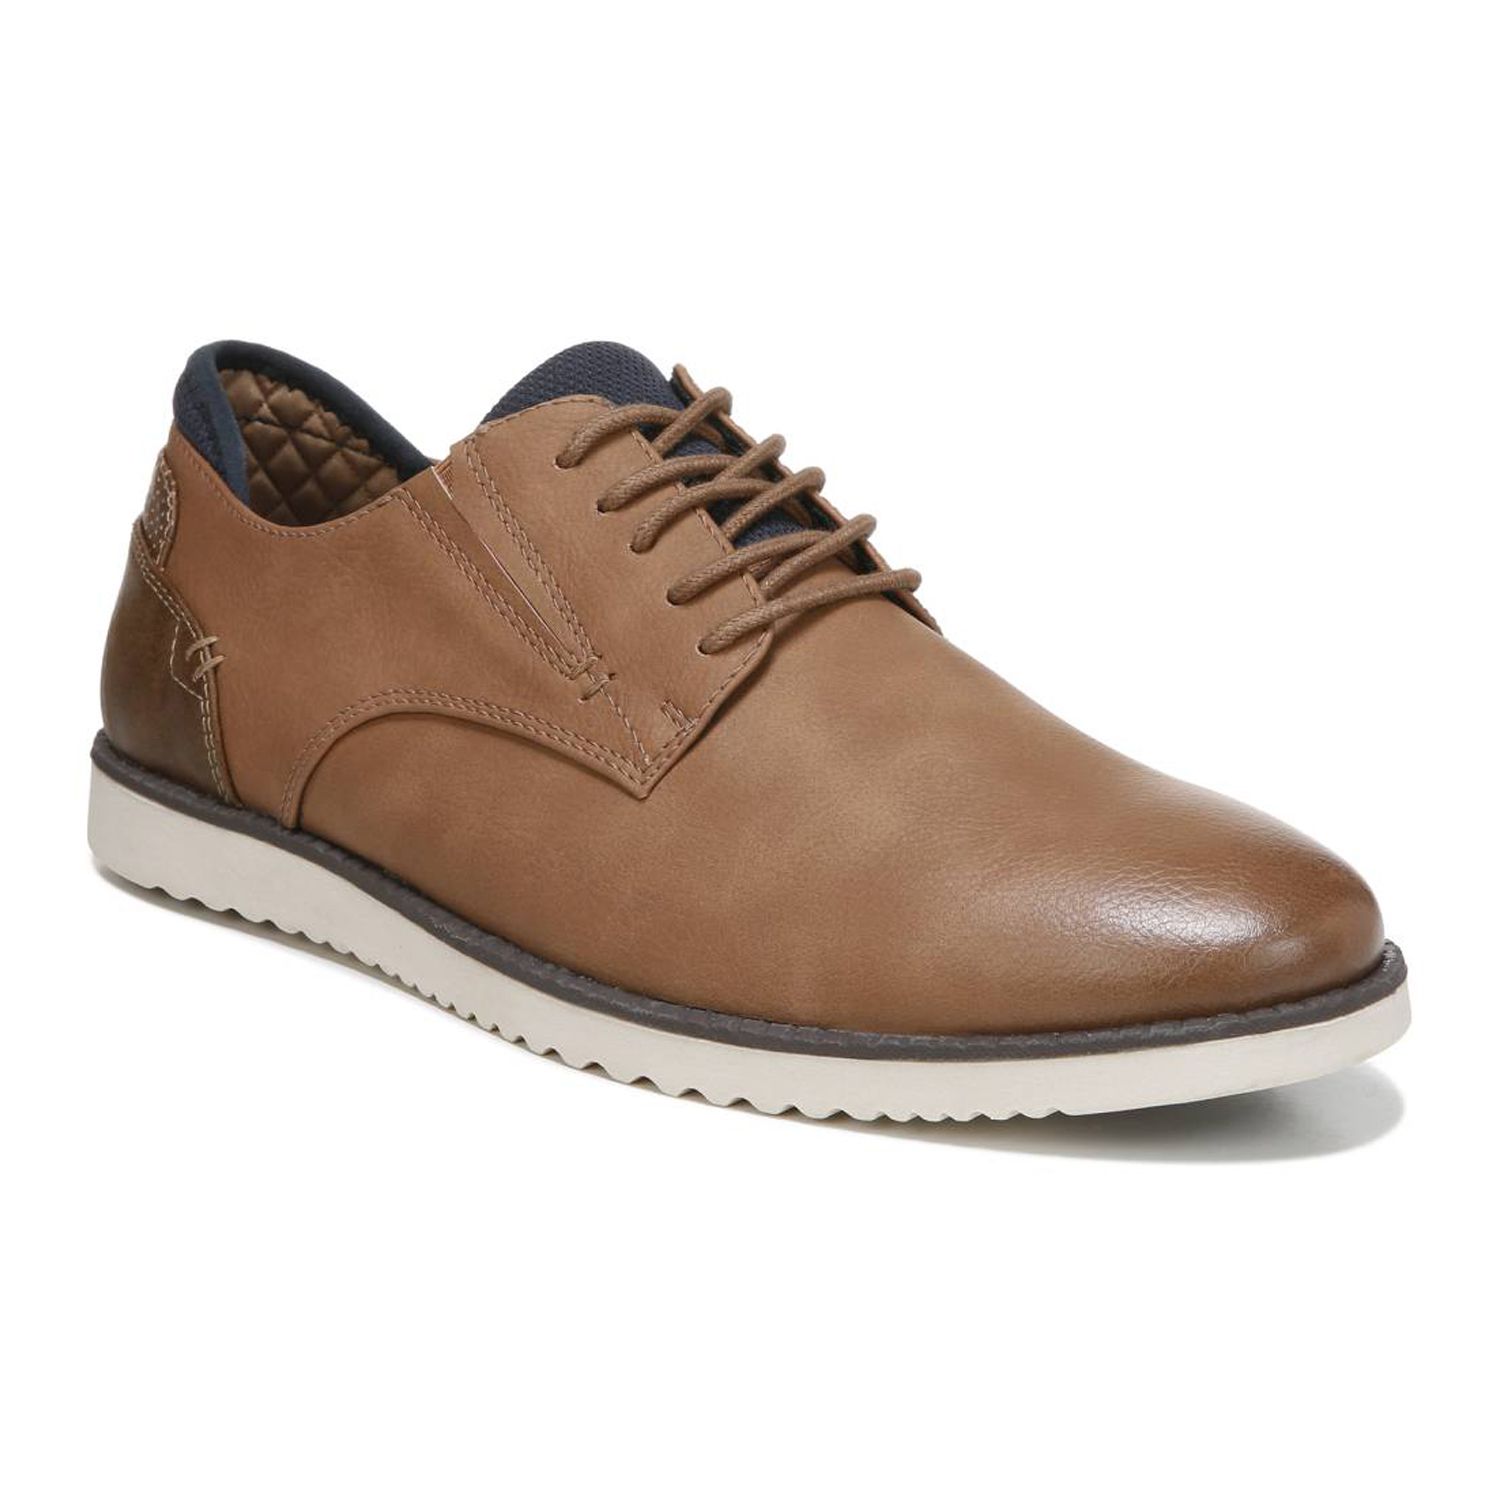 Image for Dr. Scholl's Sway Men's Oxford Shoes at Kohl's.